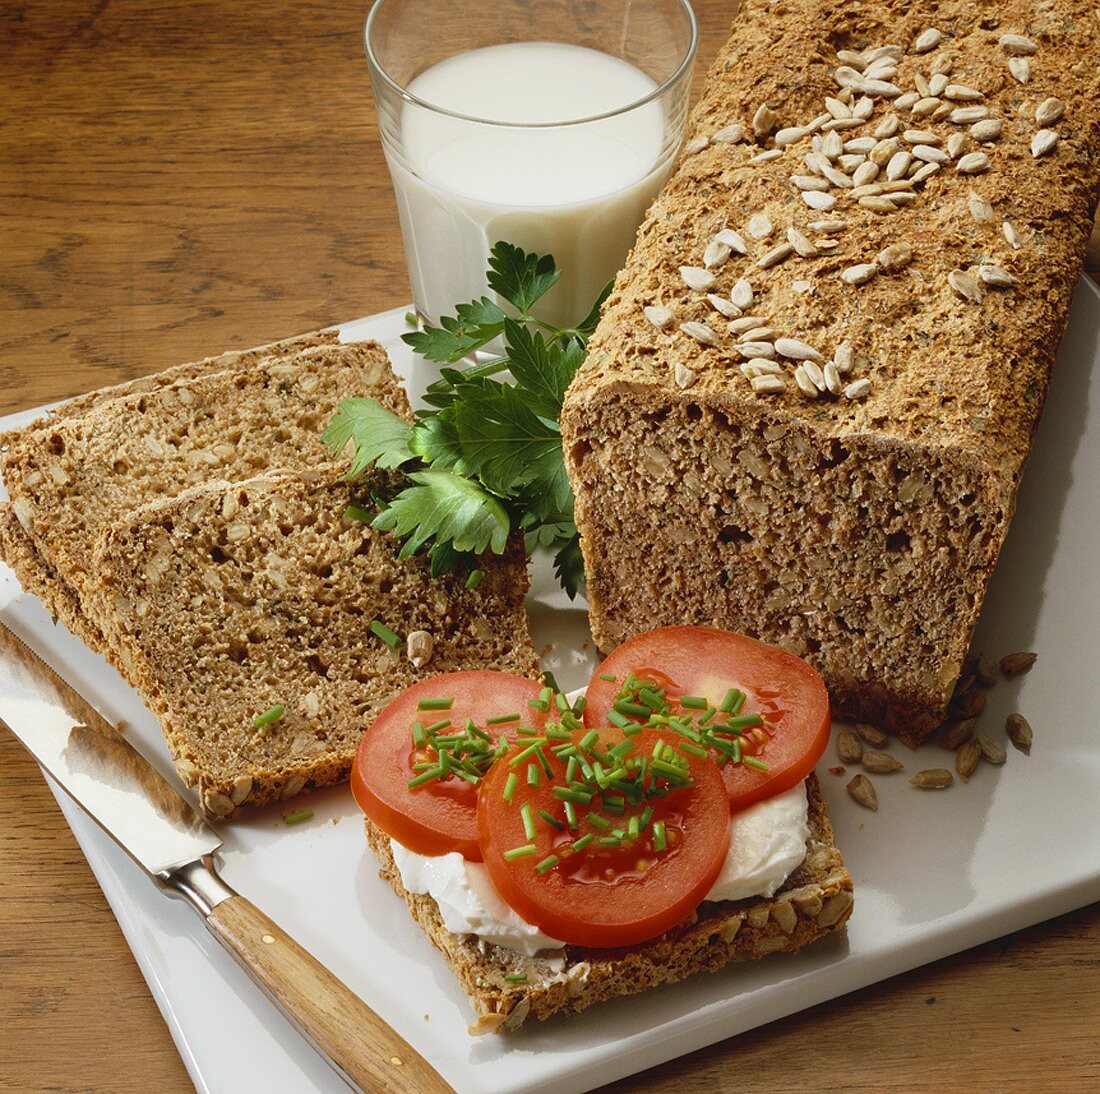 Wholemeal bread with herbs, one slice topped with tomato